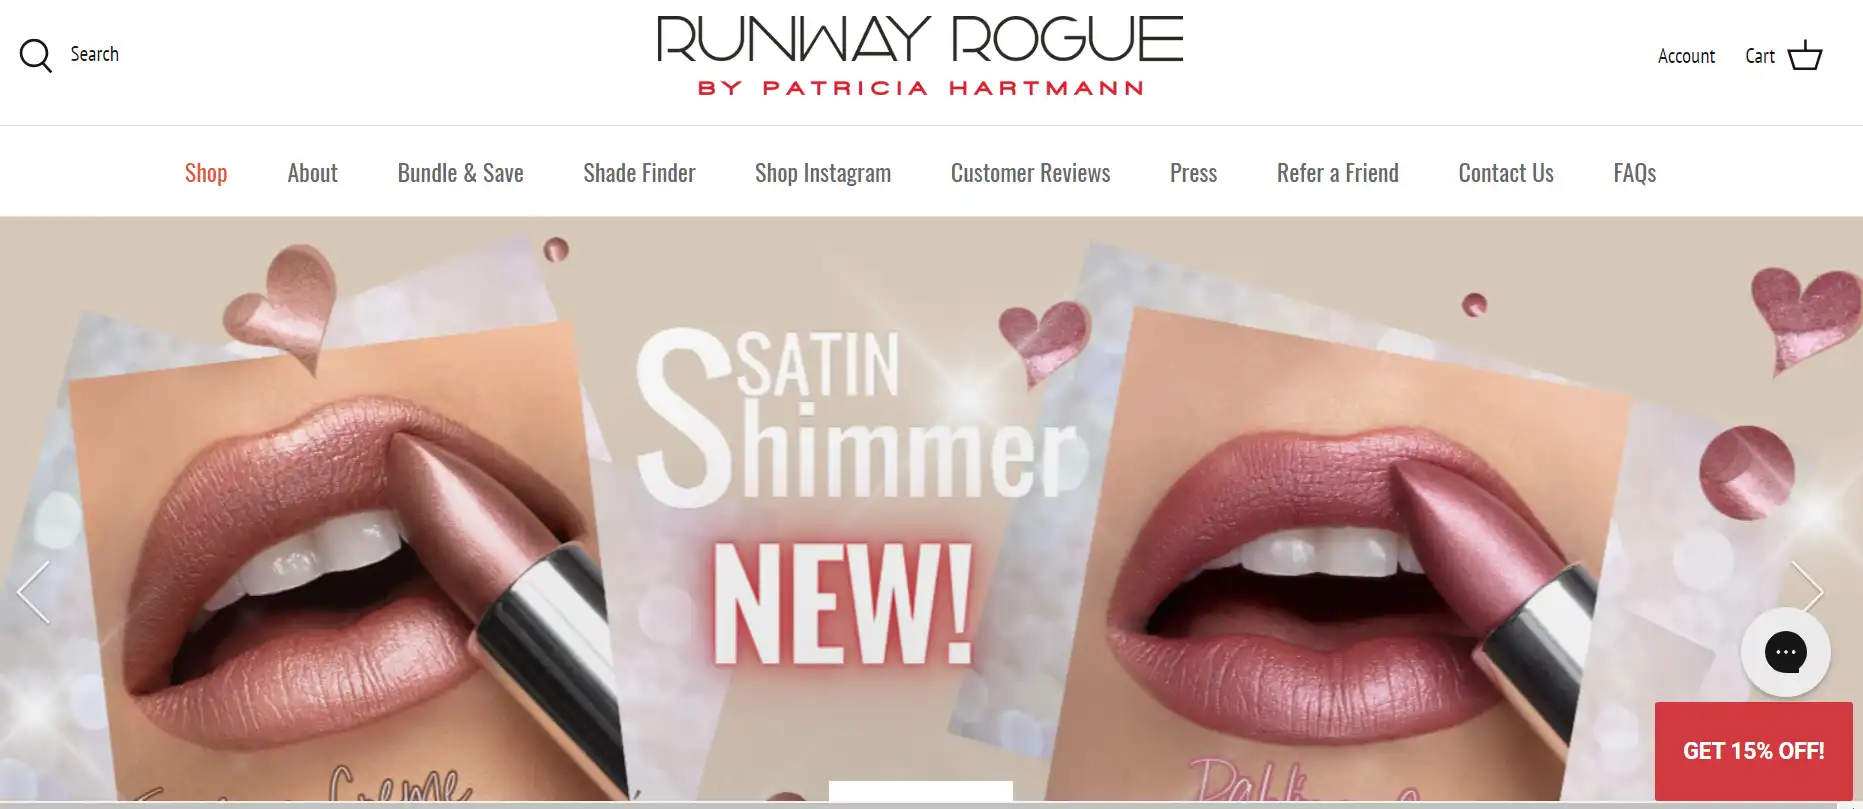 You are currently viewing Runway Rogue Lipstick Reviews – Is It Legit or a Scam?